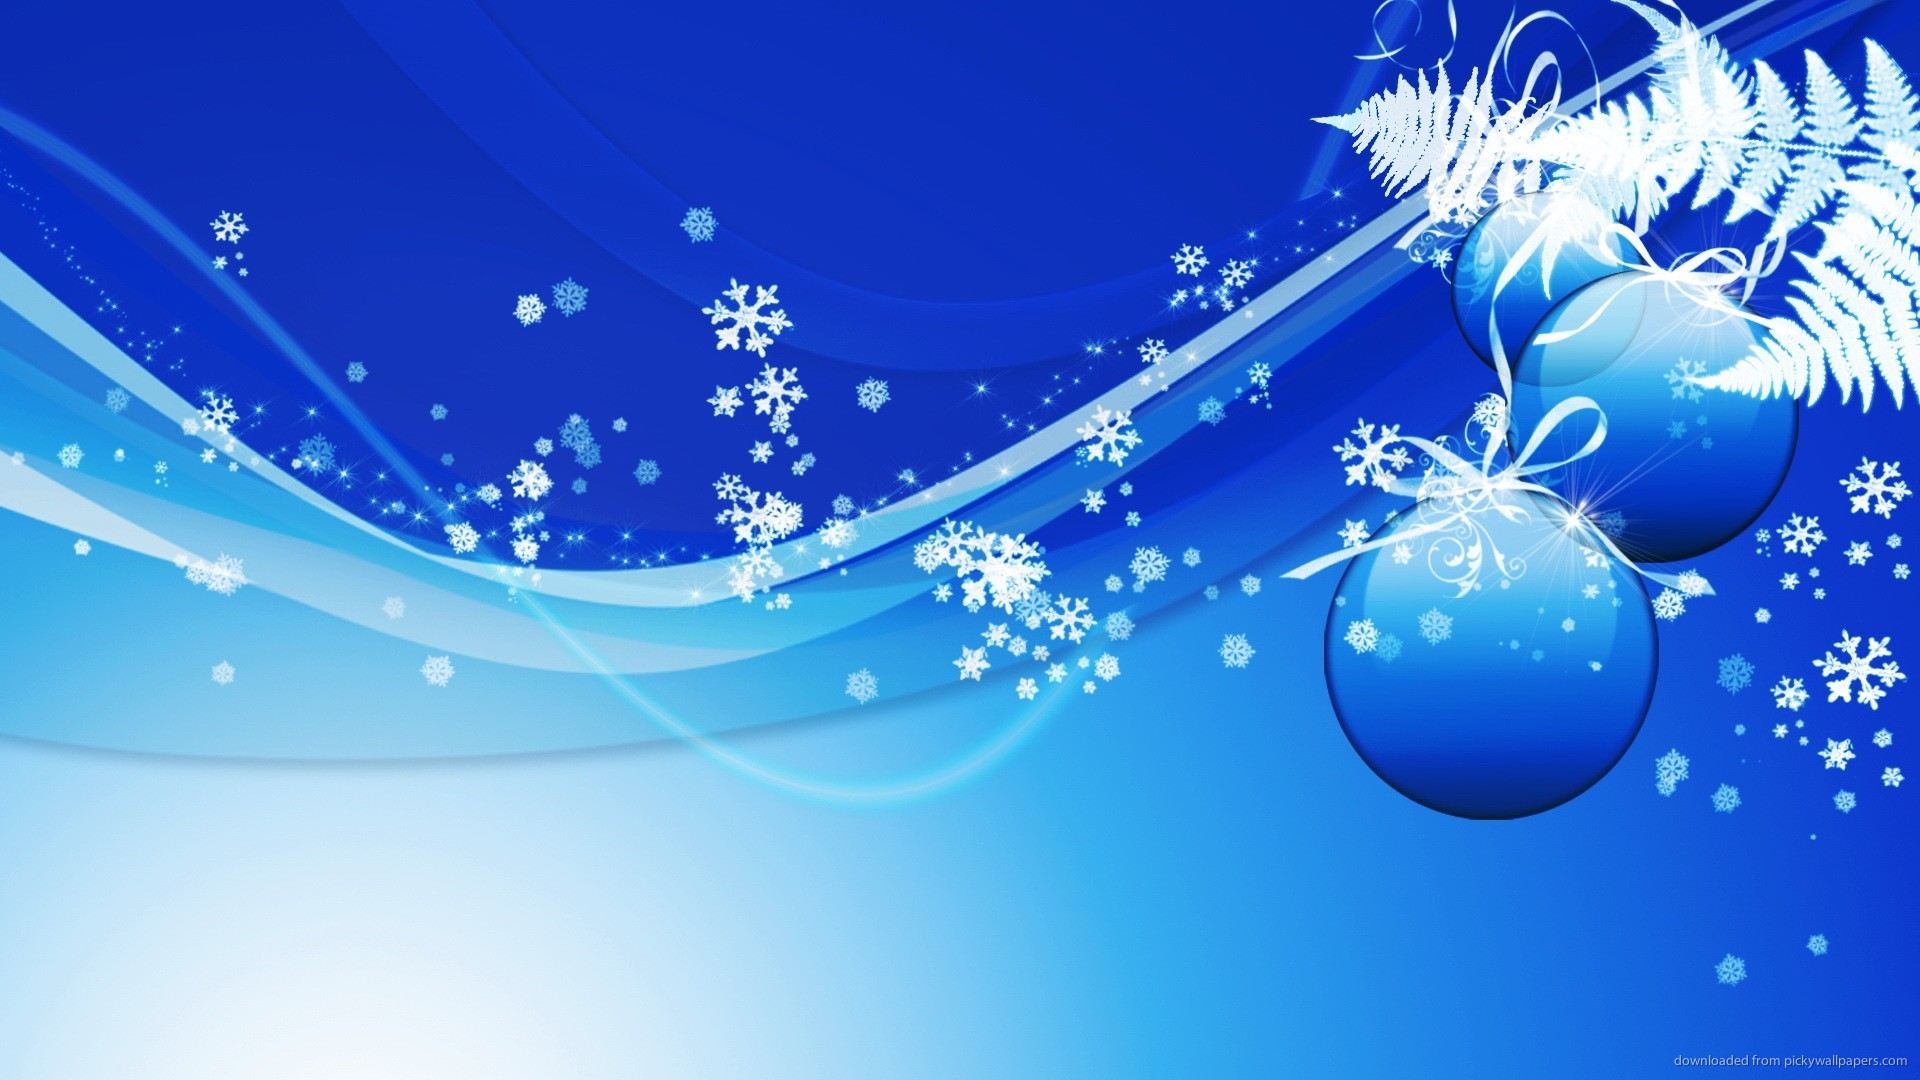 Blue Design Christmas Background Picture